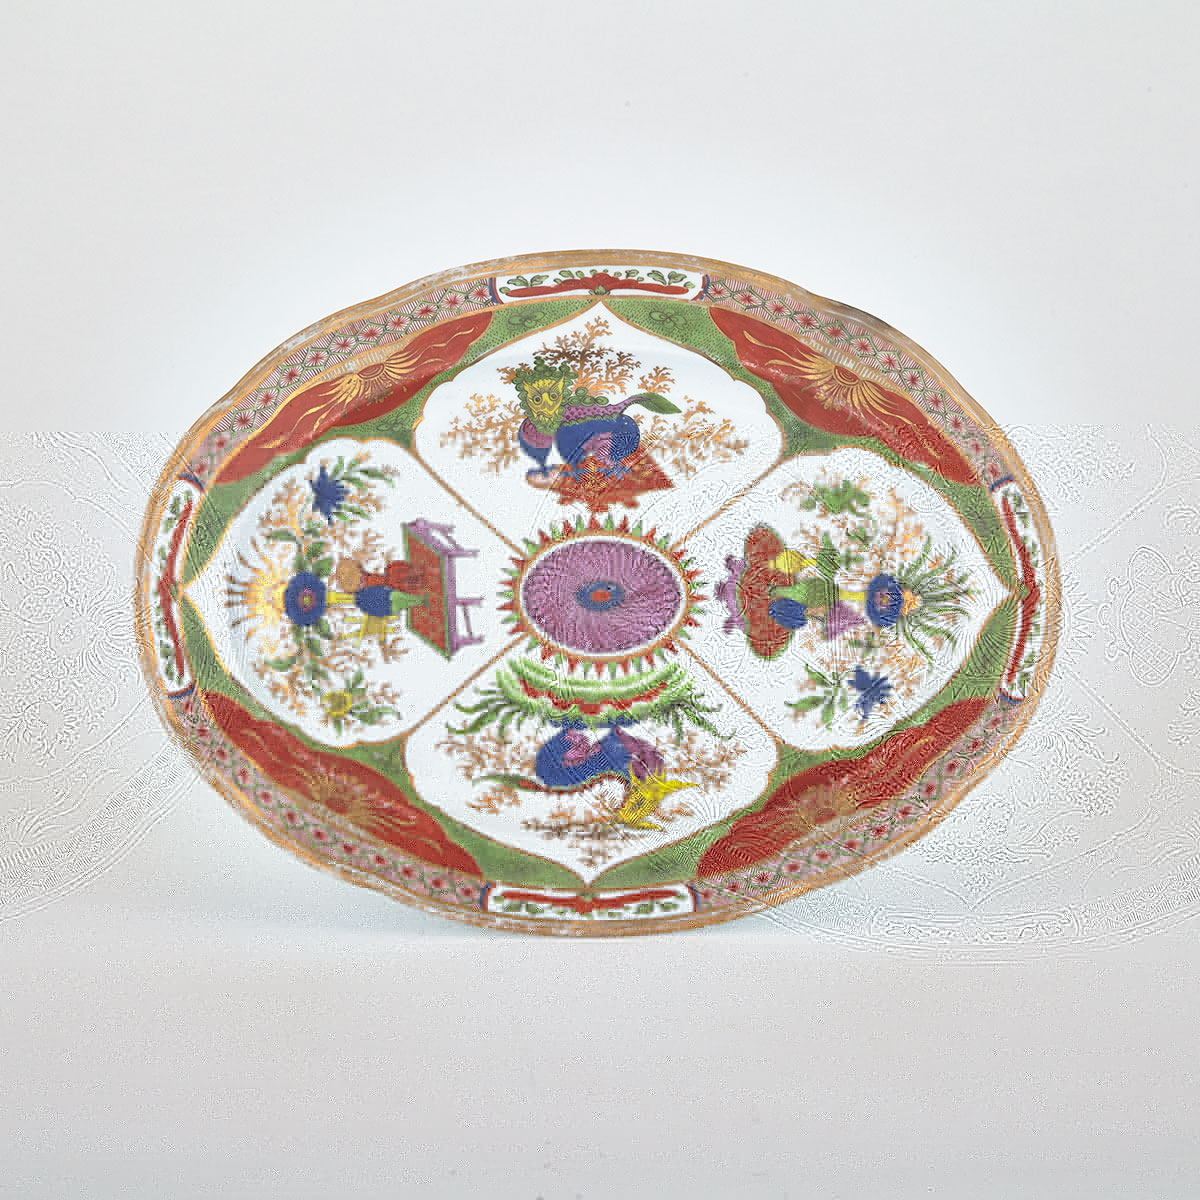 Chamberlain’s Worcester ‘Dragons in Compartments’ Oval Platter, c.1800-10